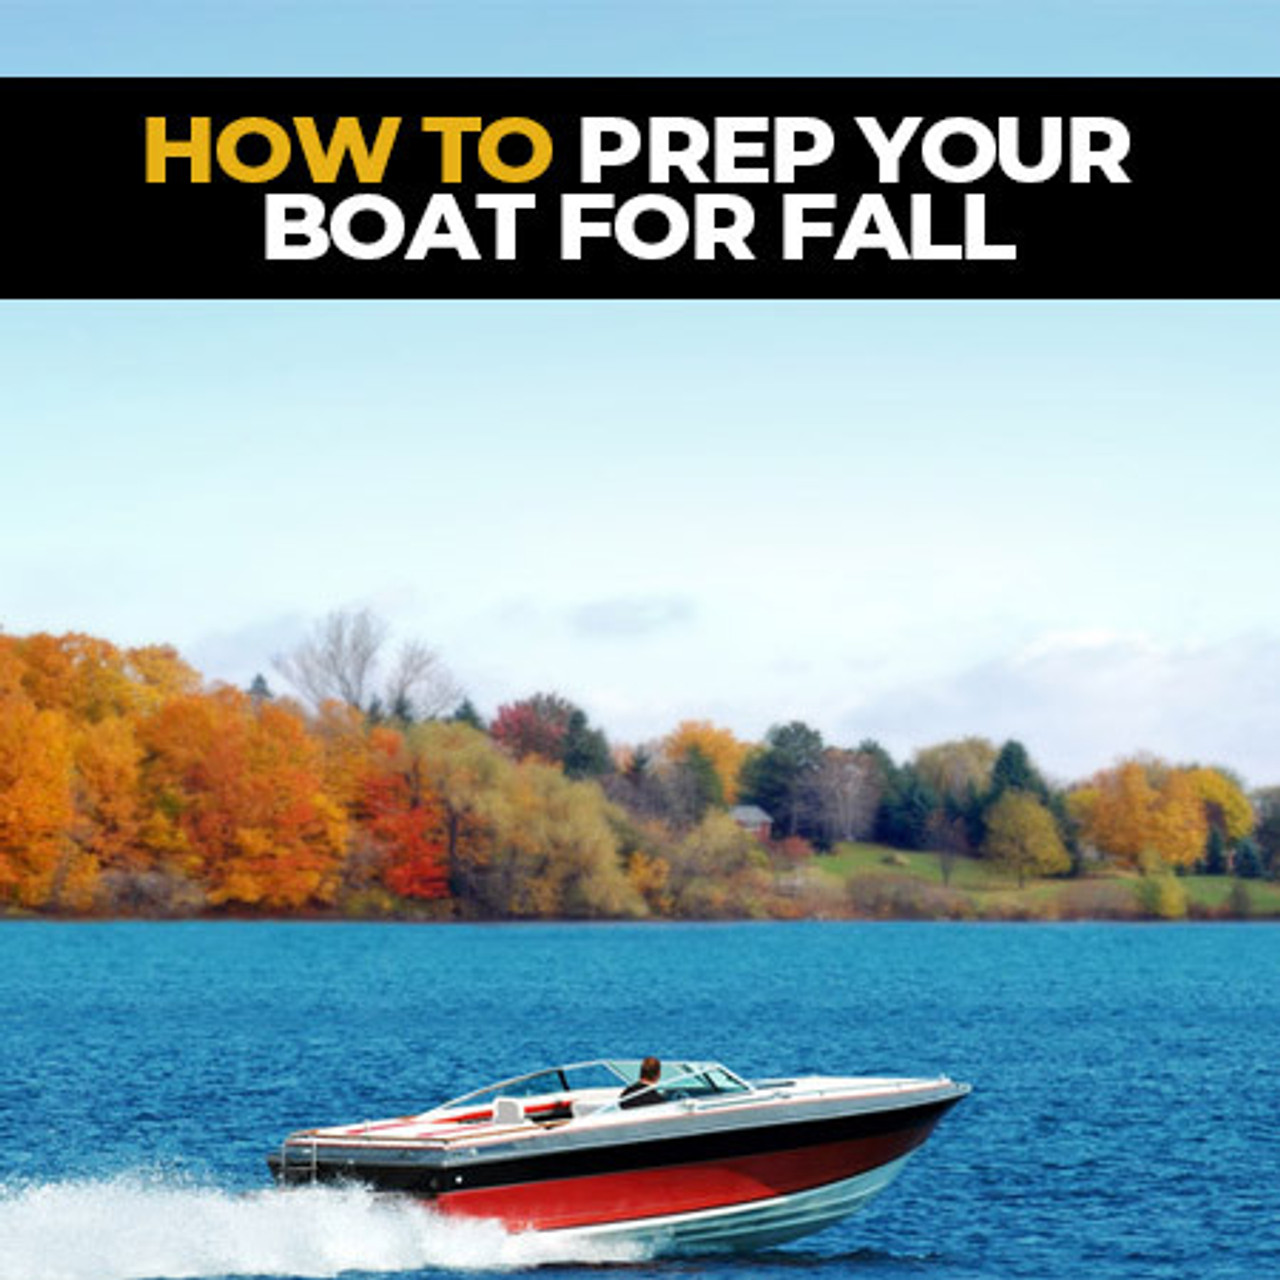 Prep Your Boat For Fall with Marine 31 Boat Care